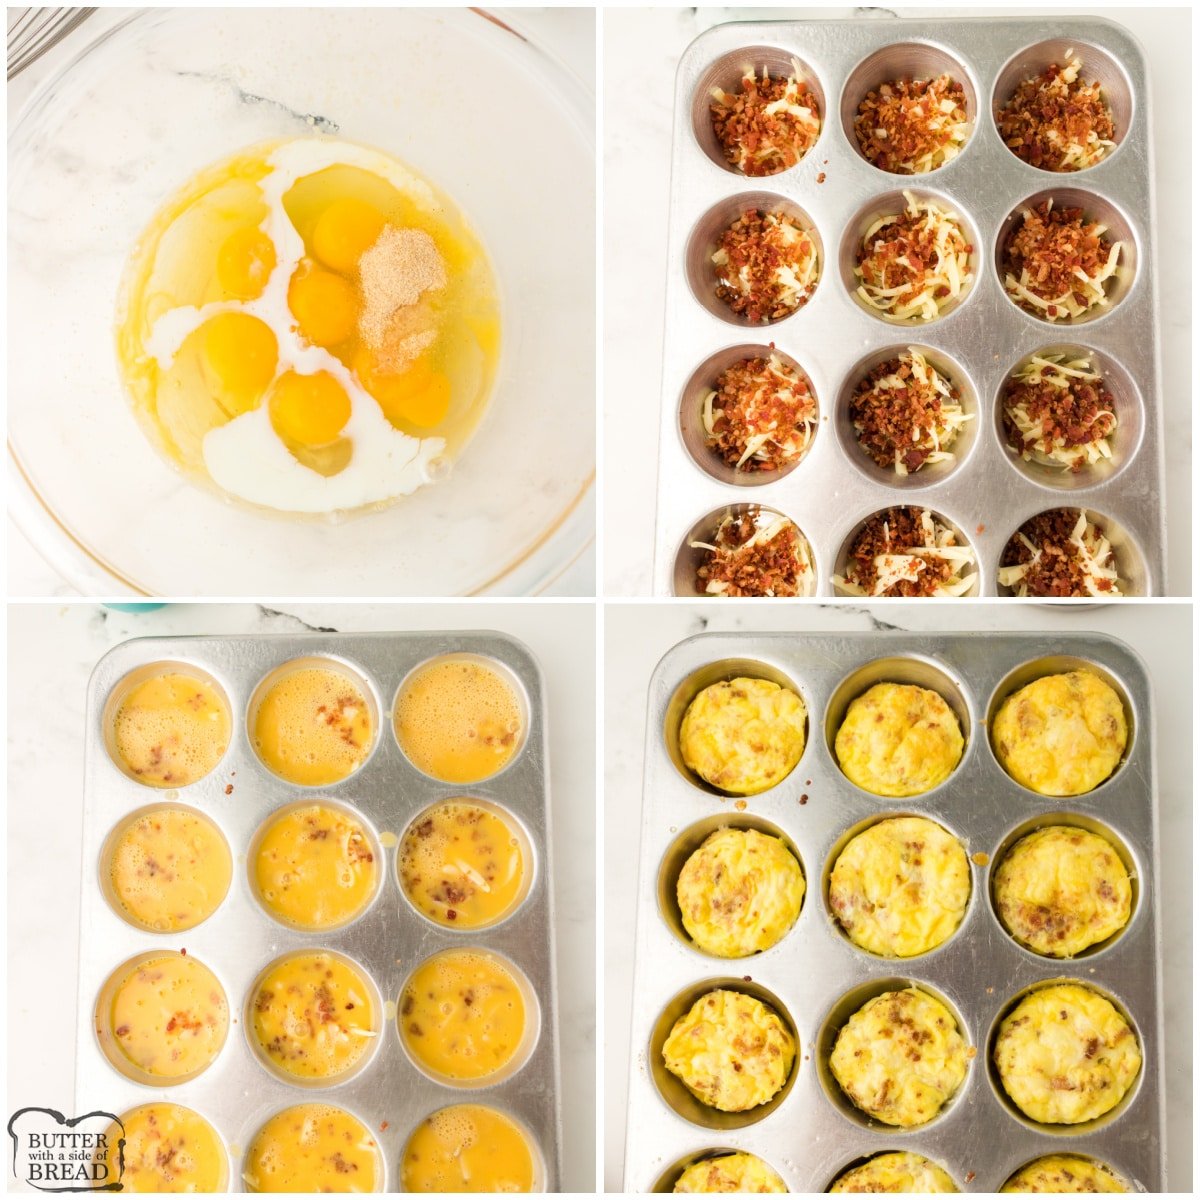 Step by step instructions on how to make Easy Egg Muffins